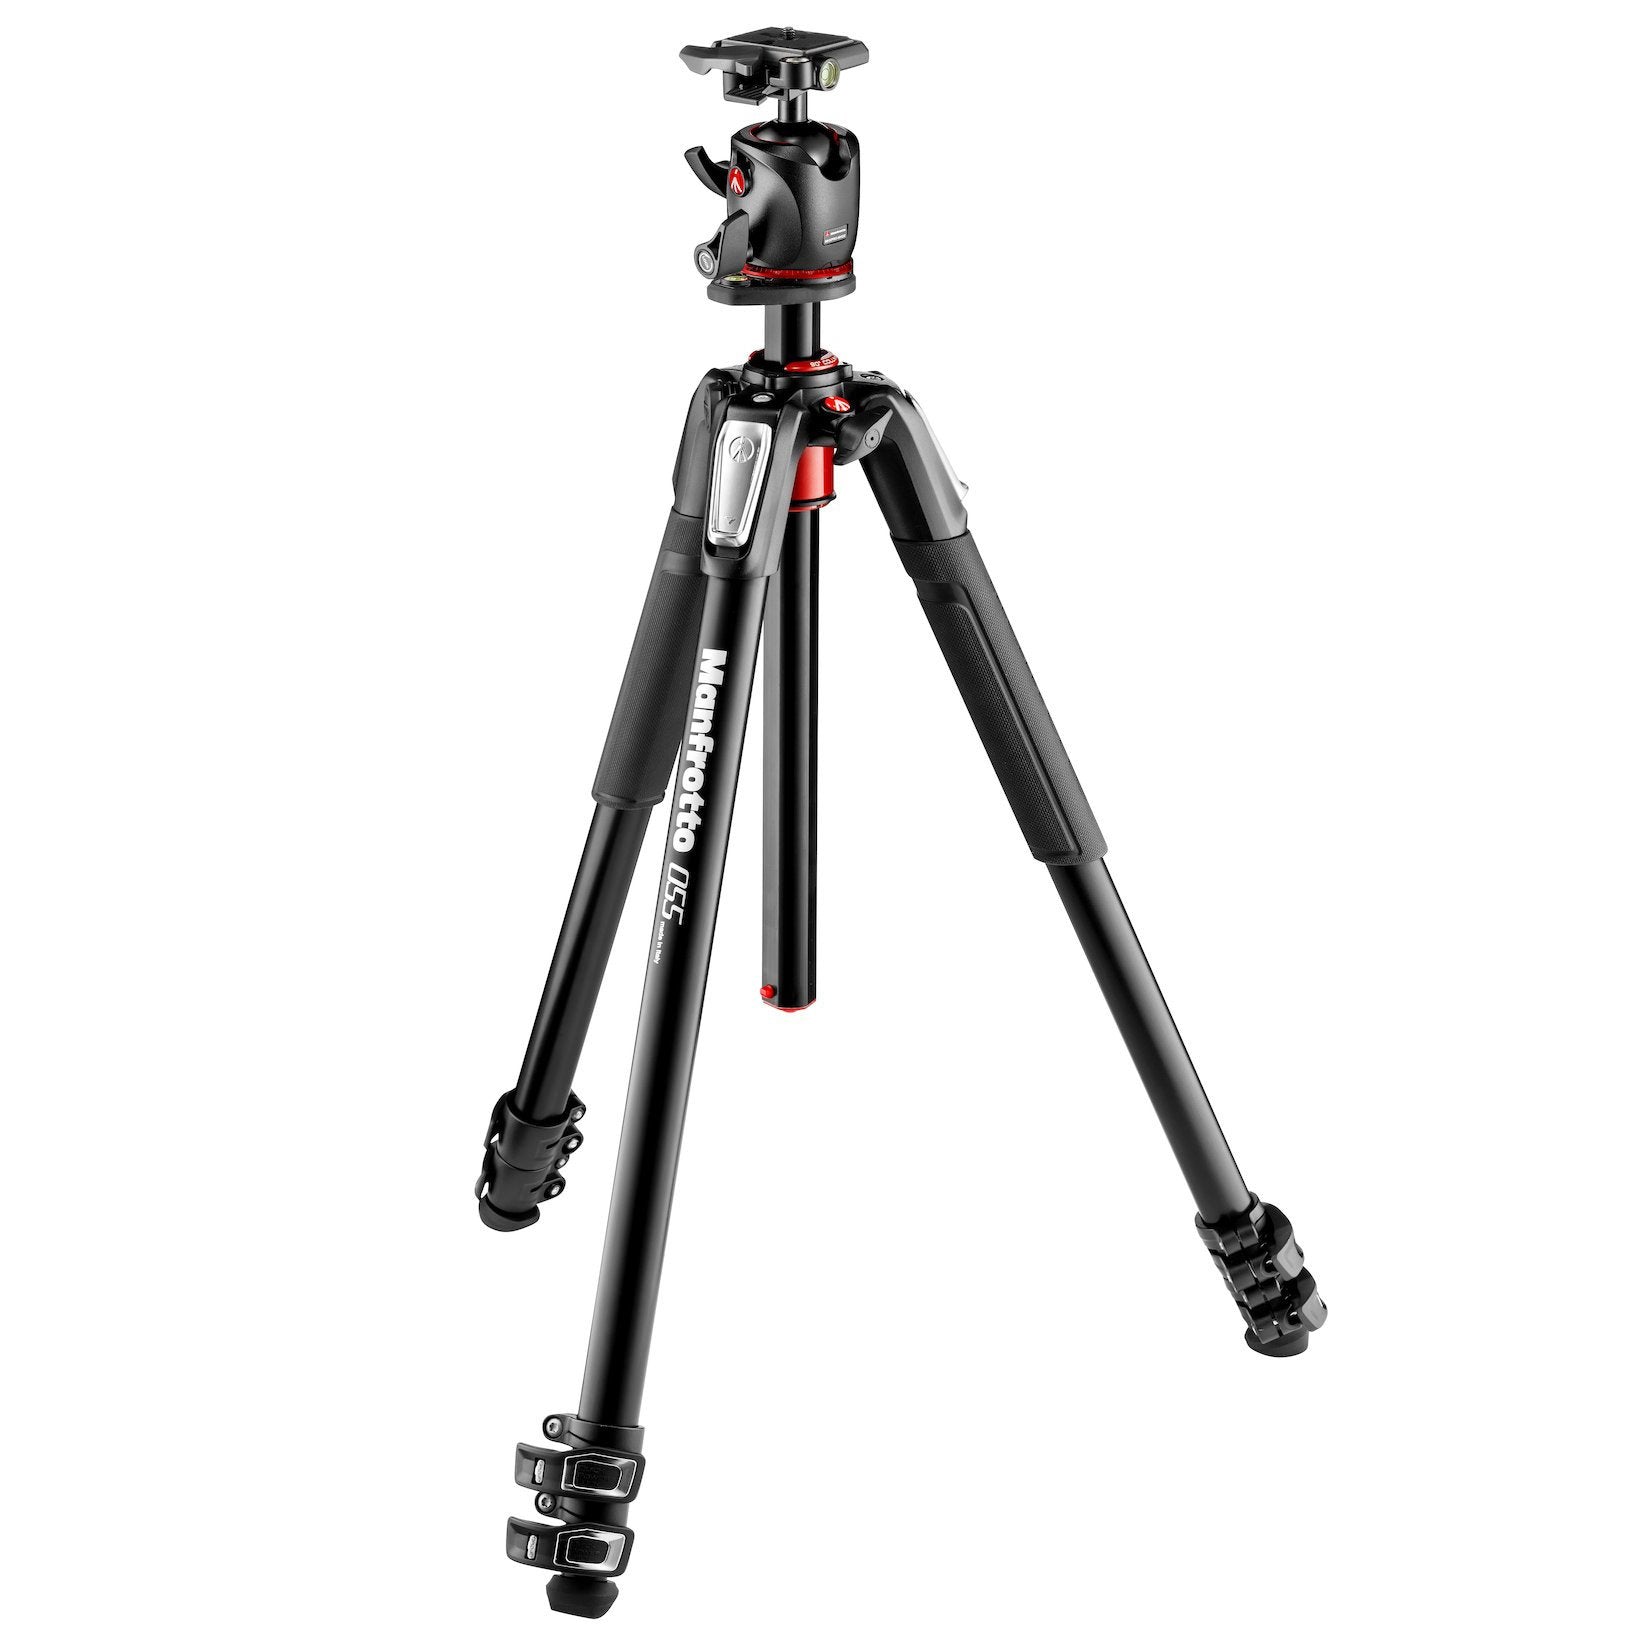 Manfrotto MK055XPRO3-BHQ2 Alu 3-Section Tripod with XPRO Ball Head + 200PL plate Manfrotto Photo Tripod Kit